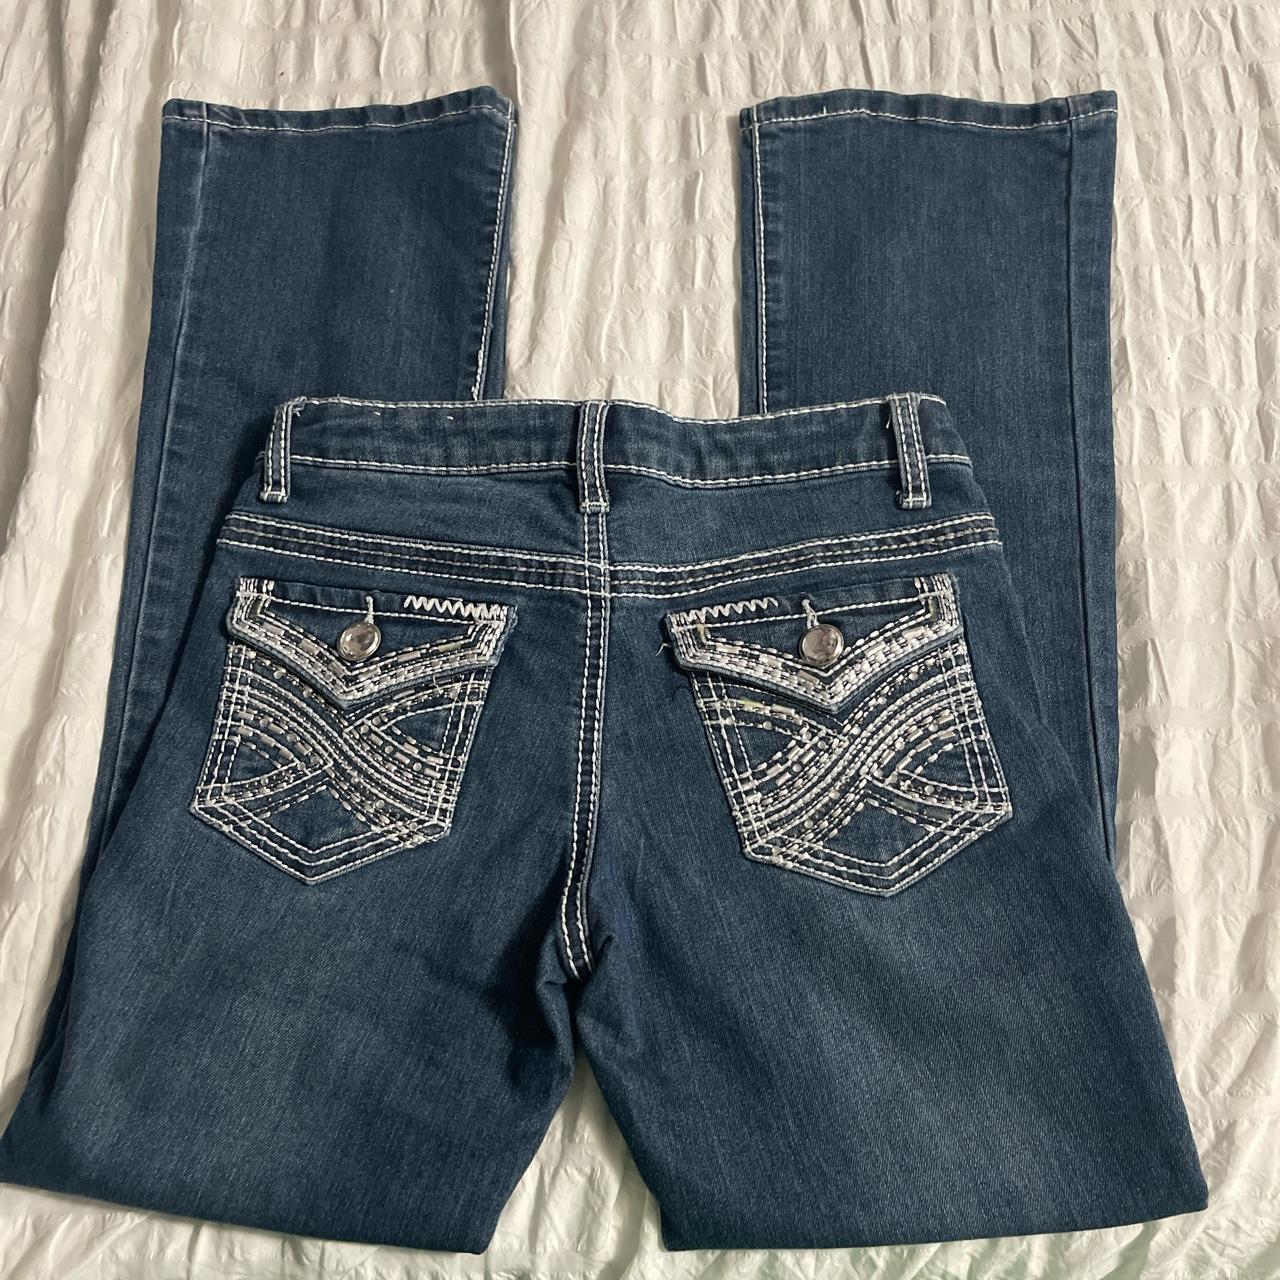 item listed by emilygsfindss